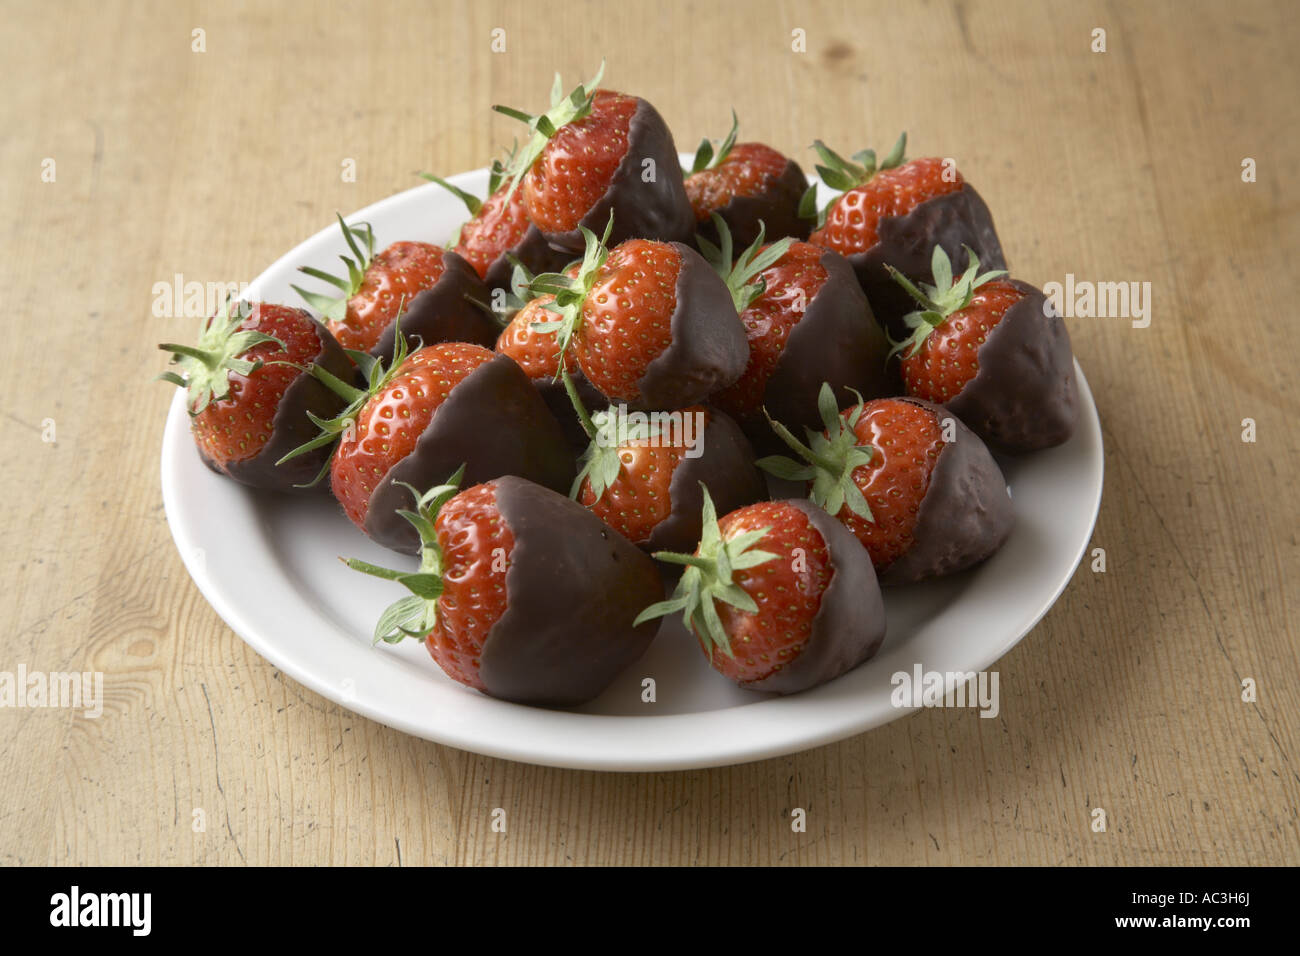 Stawberries dipped in Chocolate Stock Photo